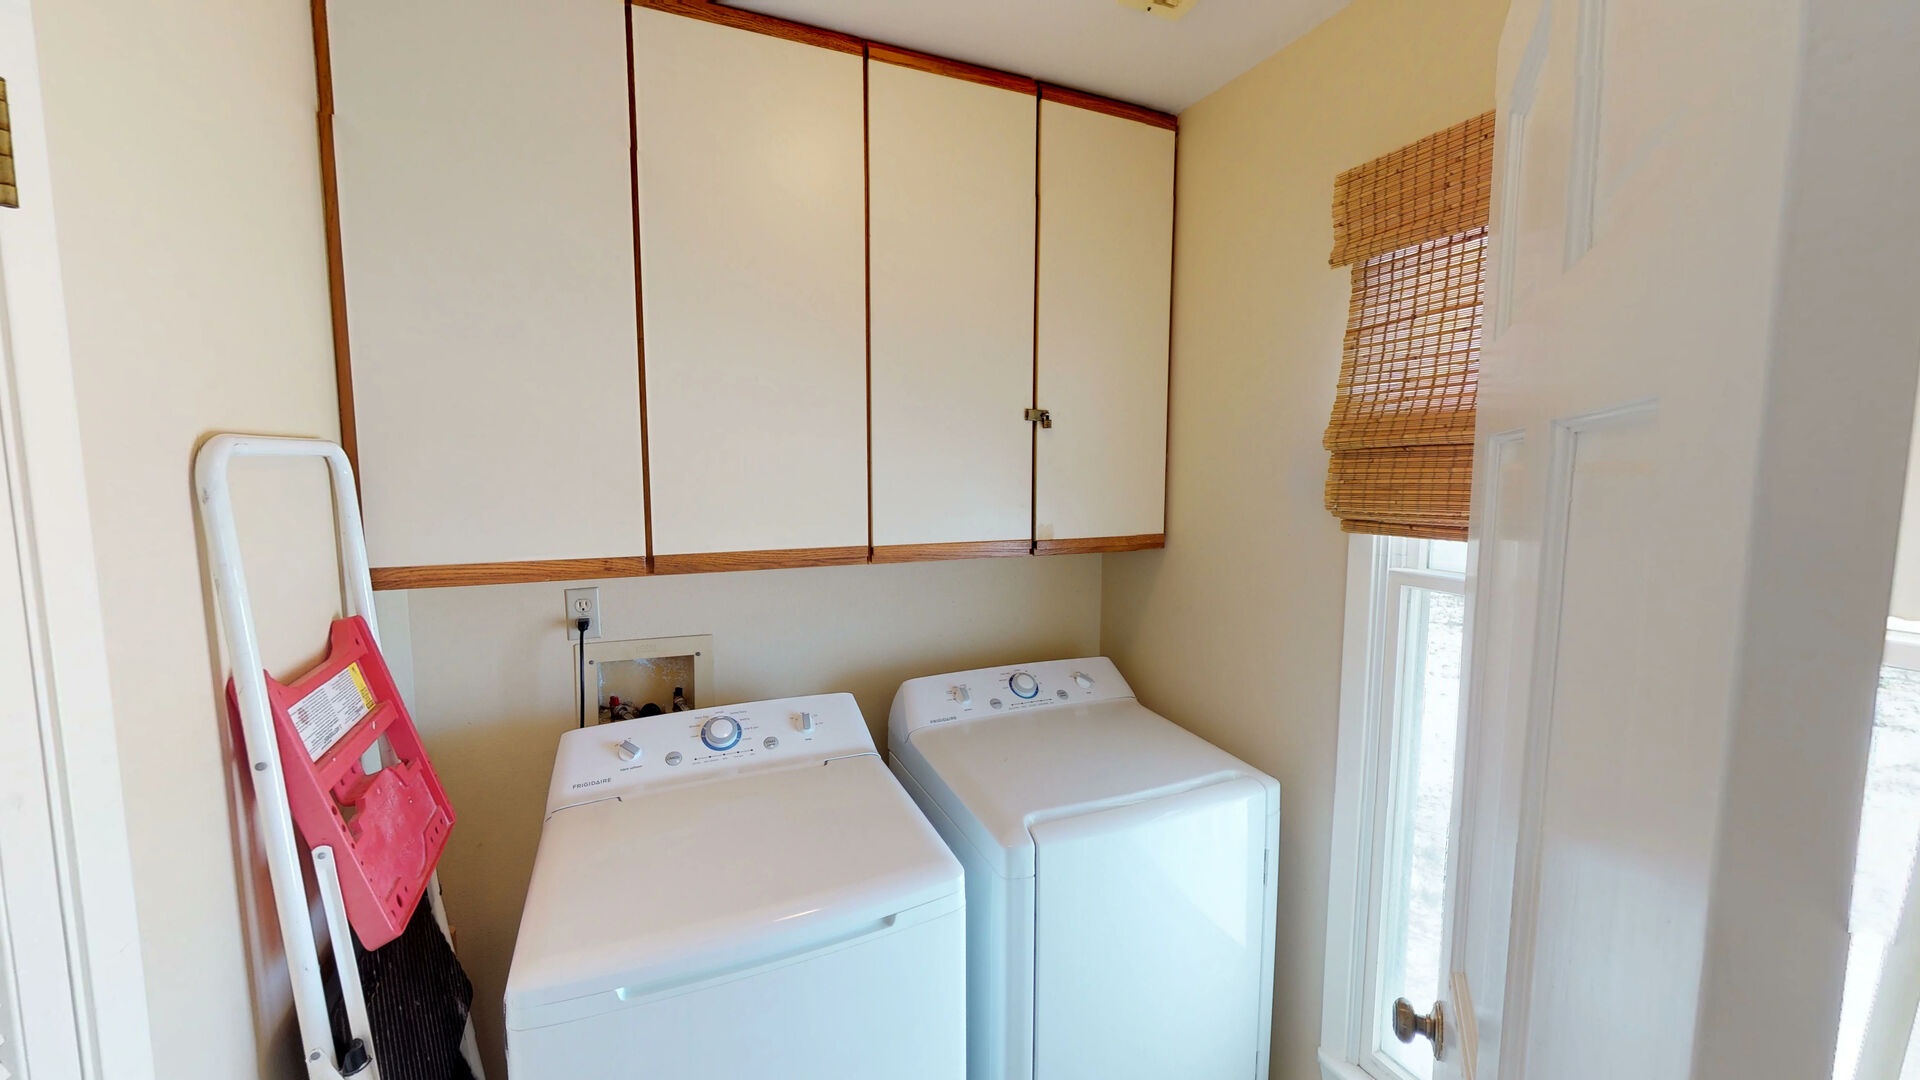 Laundry room next to kitchen